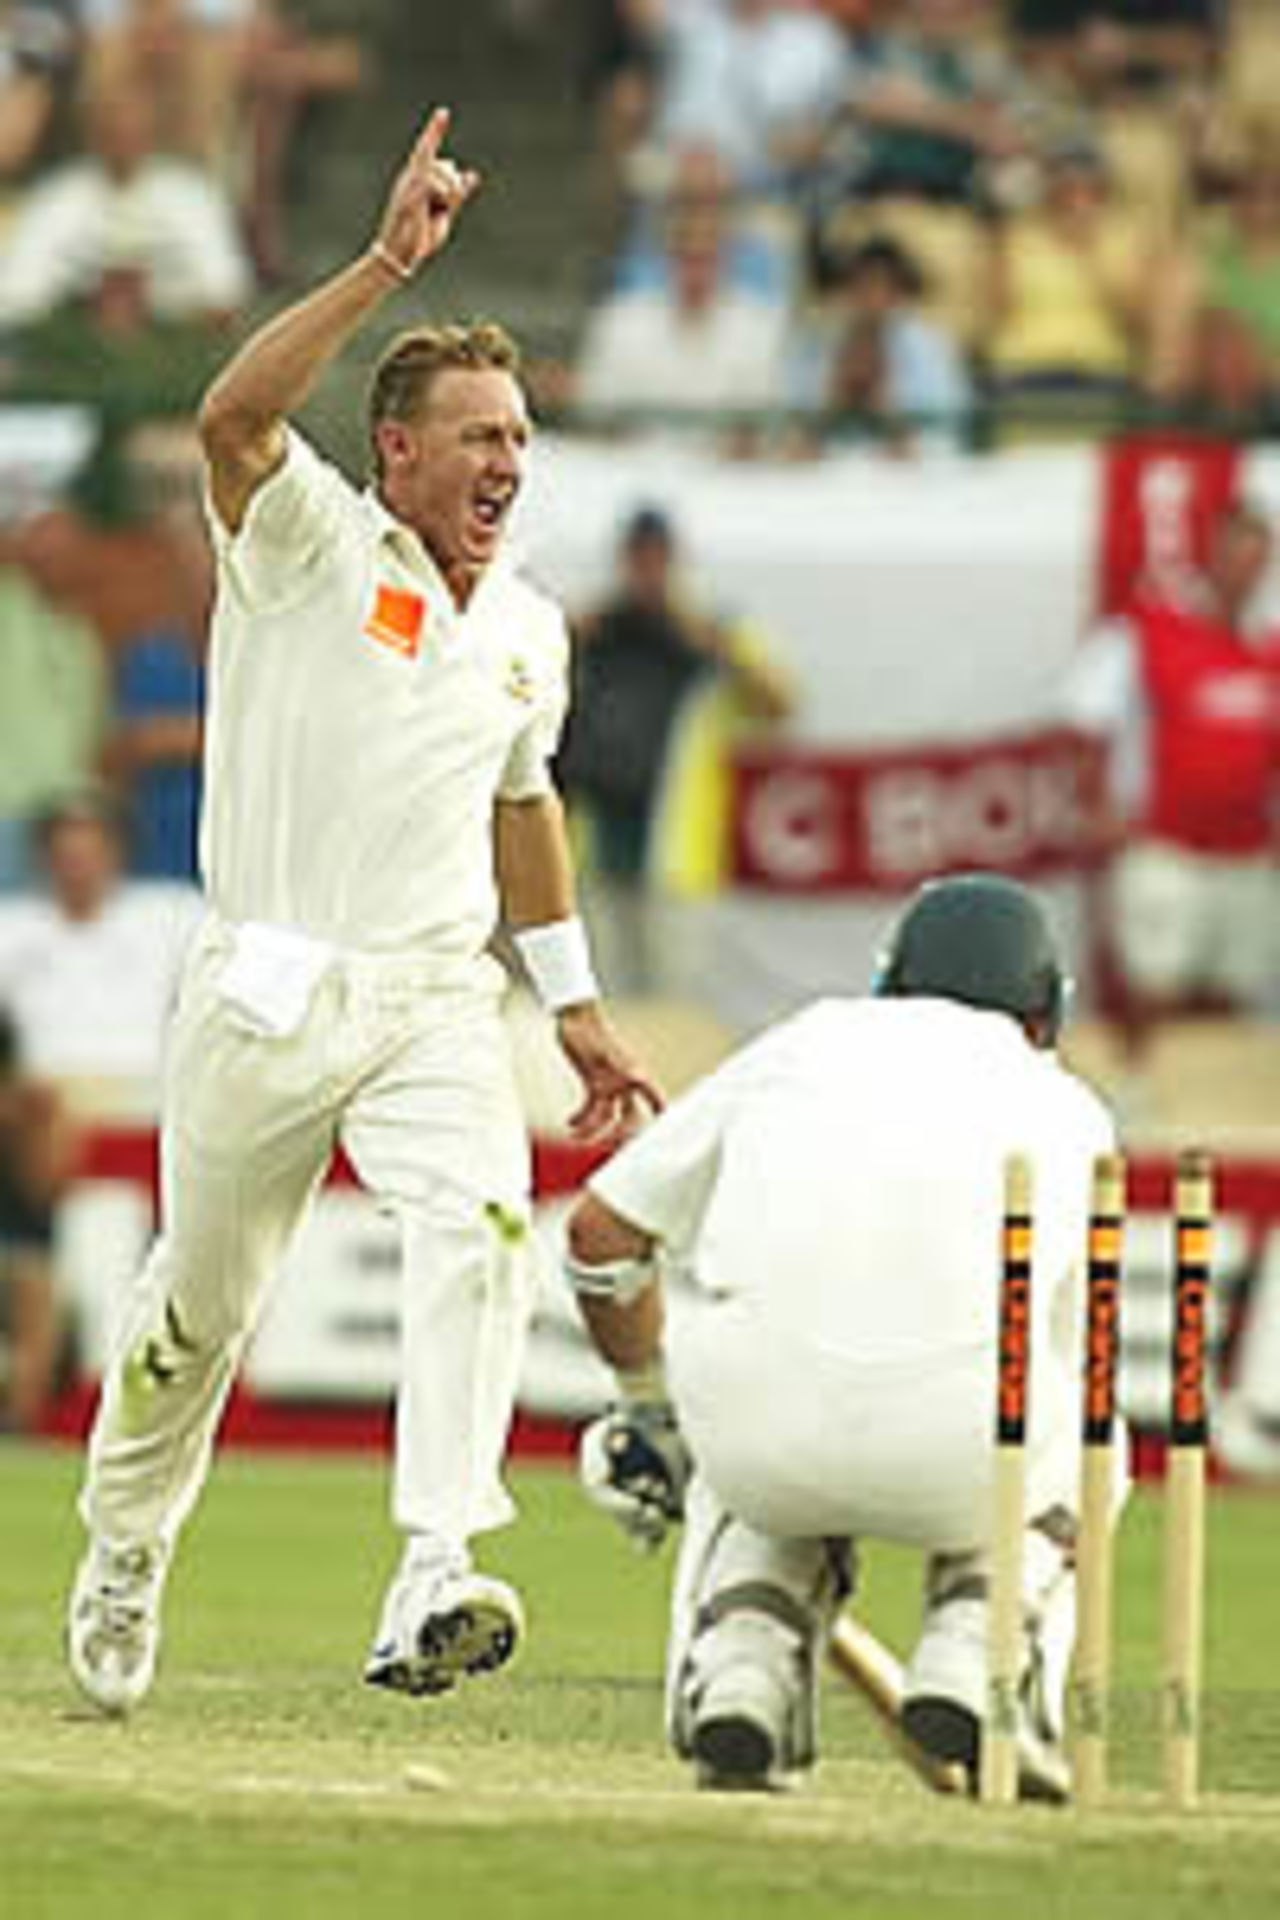 ADELAIDE - NOVEMBER 23: Andy Bichel of Australia celebrates the wicket of Nasser Hussain of England during the third day of the second Ashes Test between Australia and England played at the Adelaide Oval in Adelaide, Australia, on November 23, 2002.